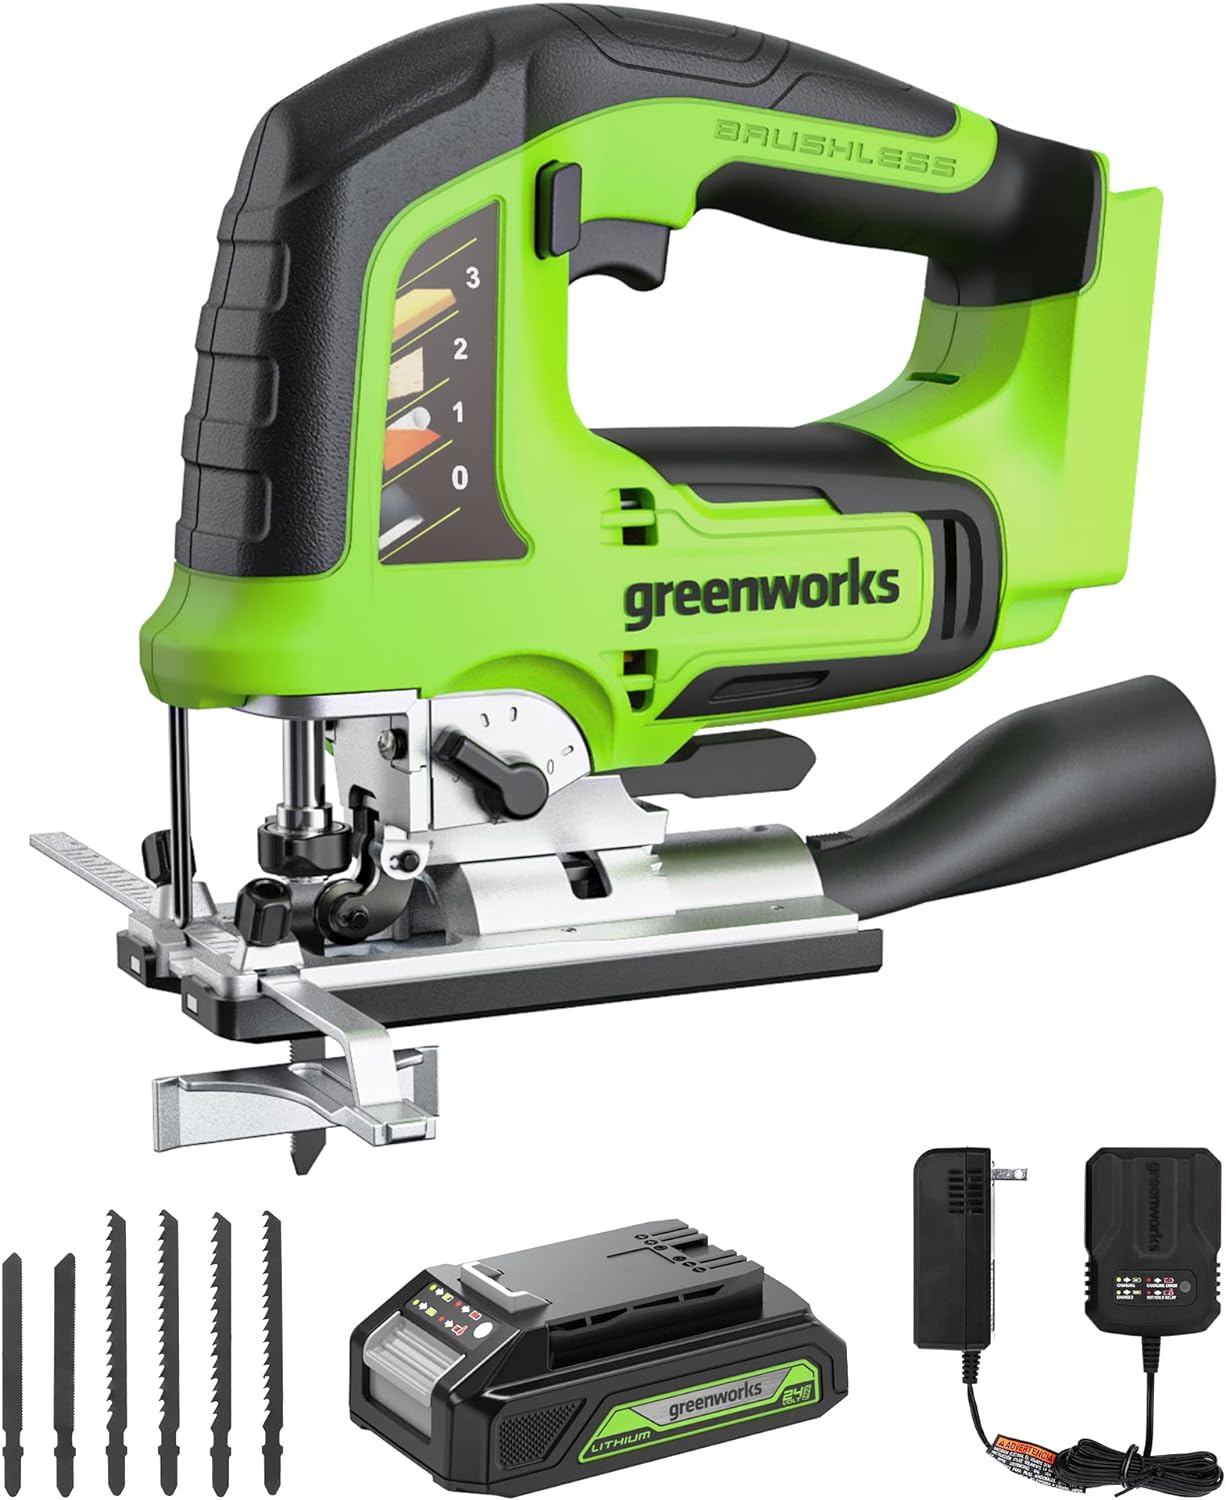 Greenworks 24V Jigsaw Brushless Cordless - 3000 SPM, 4 Orbital Settings, Variable Speed, with 2AH Battery and 2A Charger, 6PCS